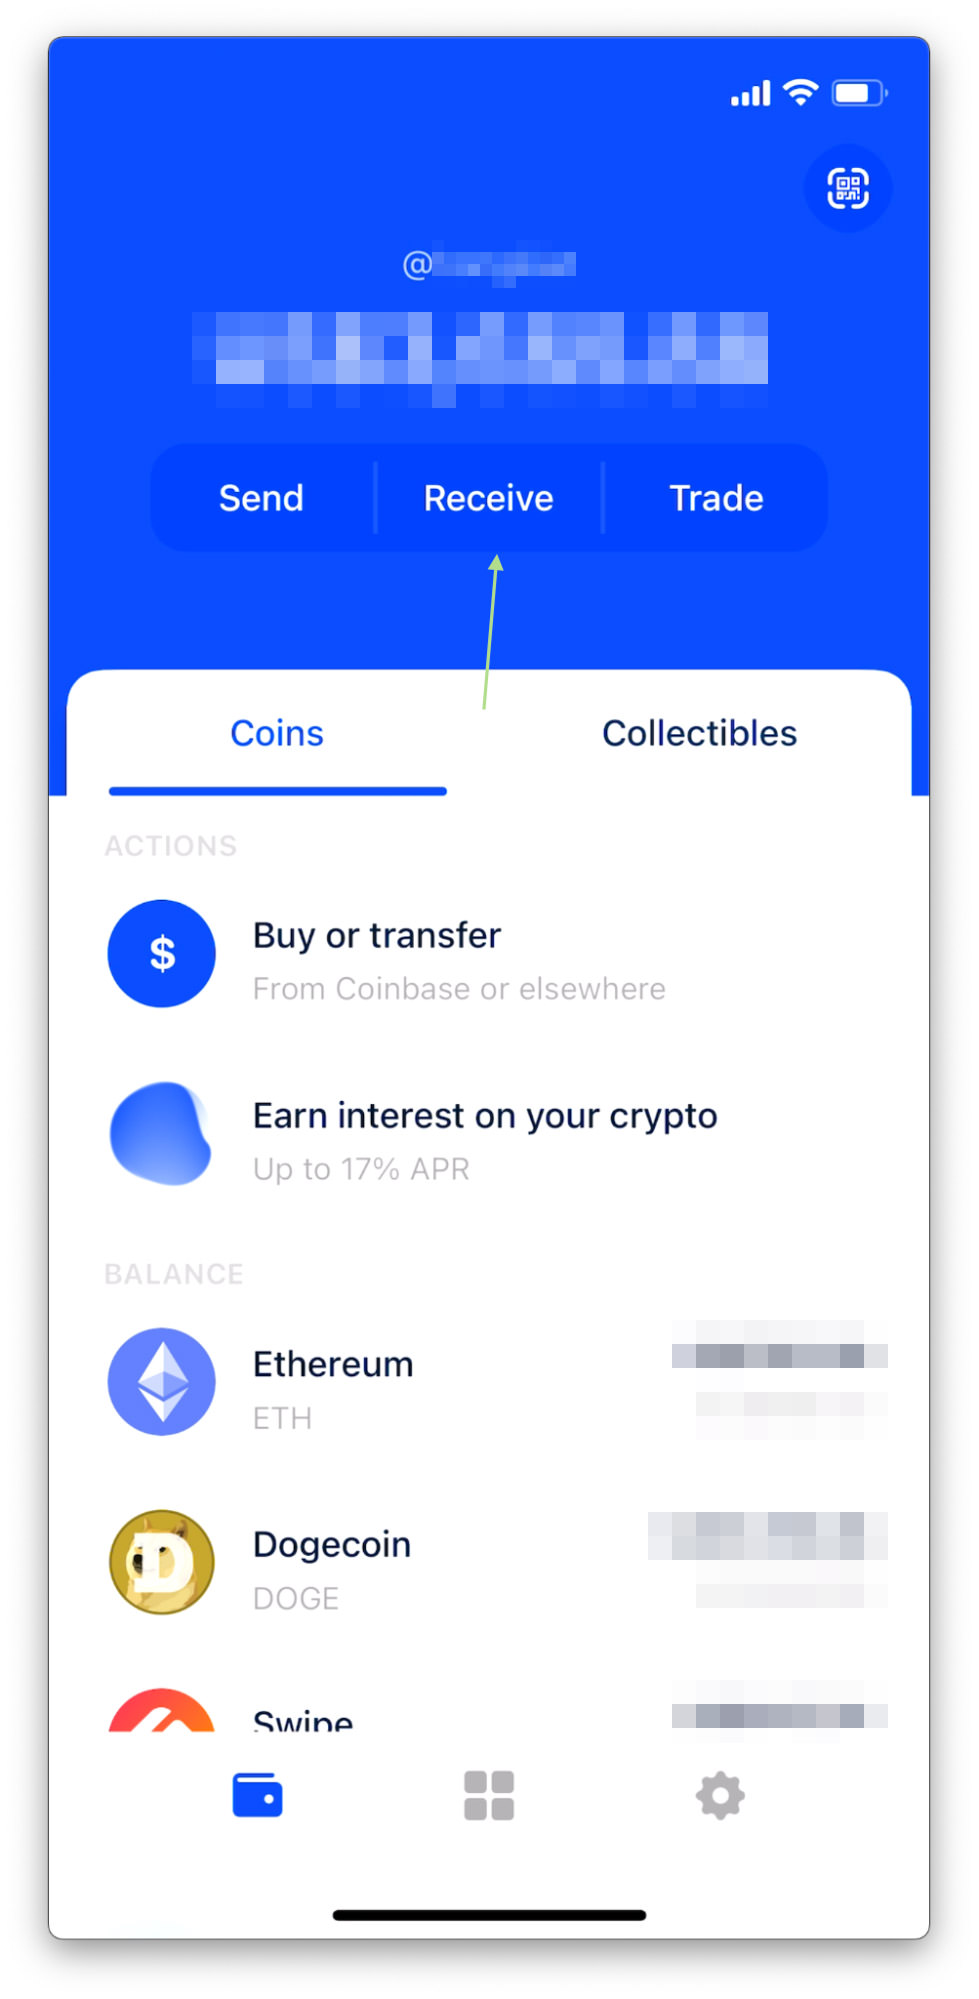 Coinbase Wallet lets users send stablecoins for free on messaging apps like WhatsApp and iMessage